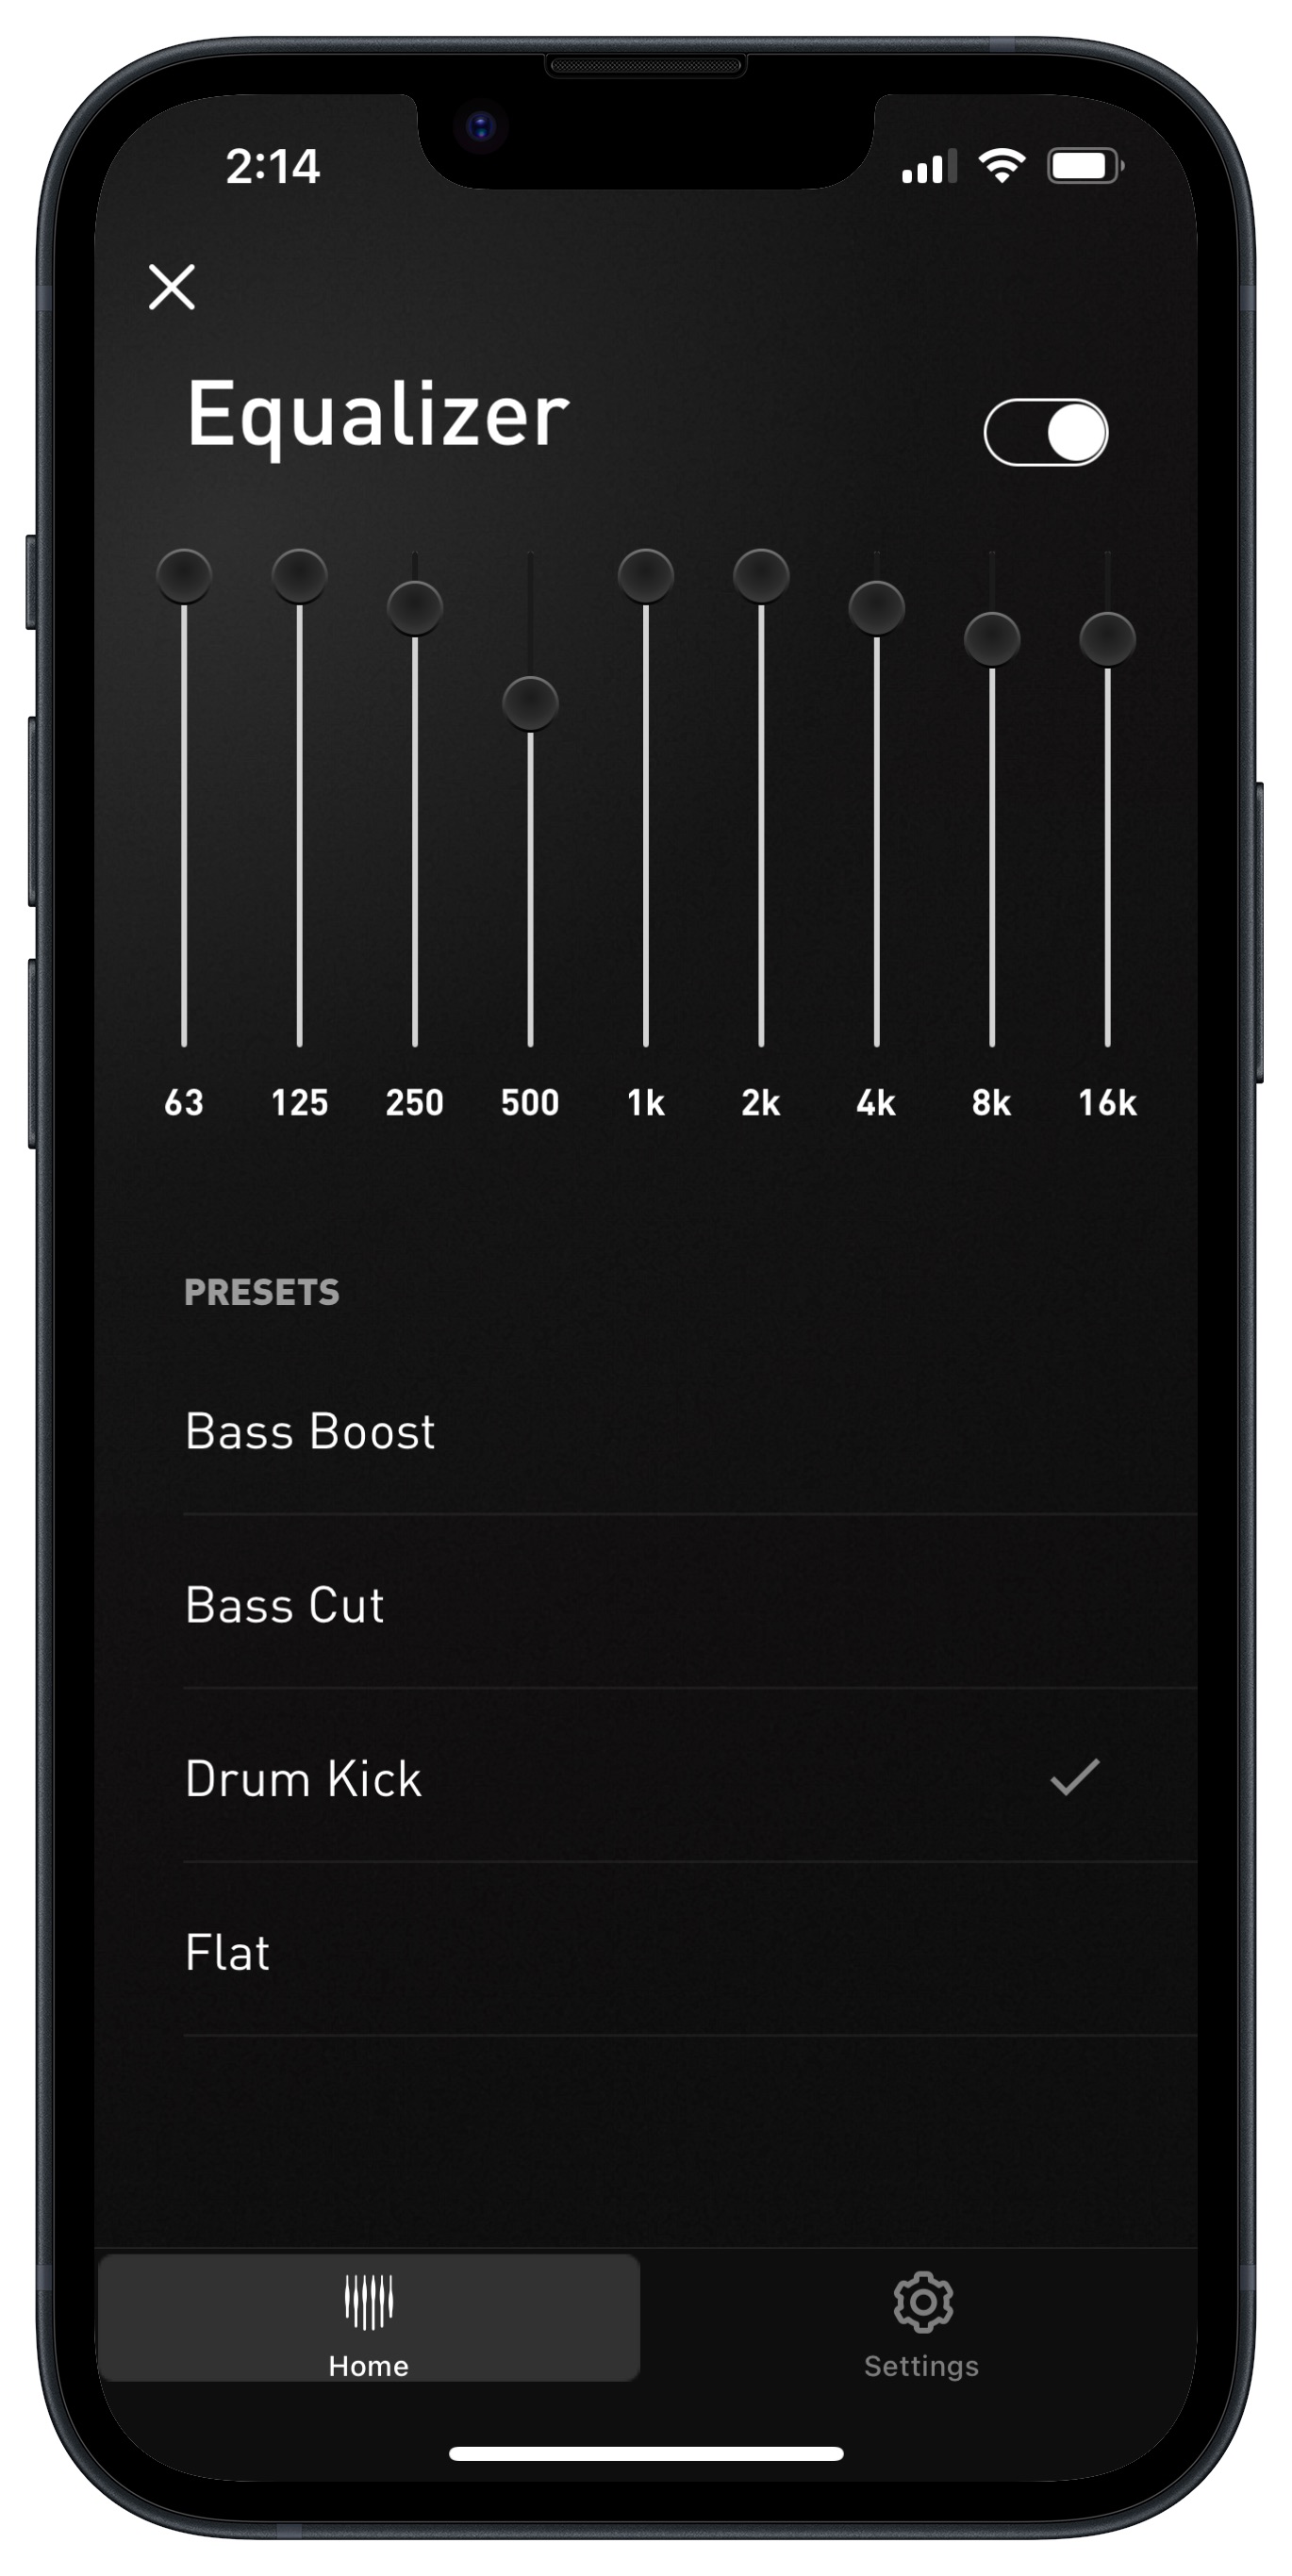 Hed Unity app for iOS: equalizer and presets.